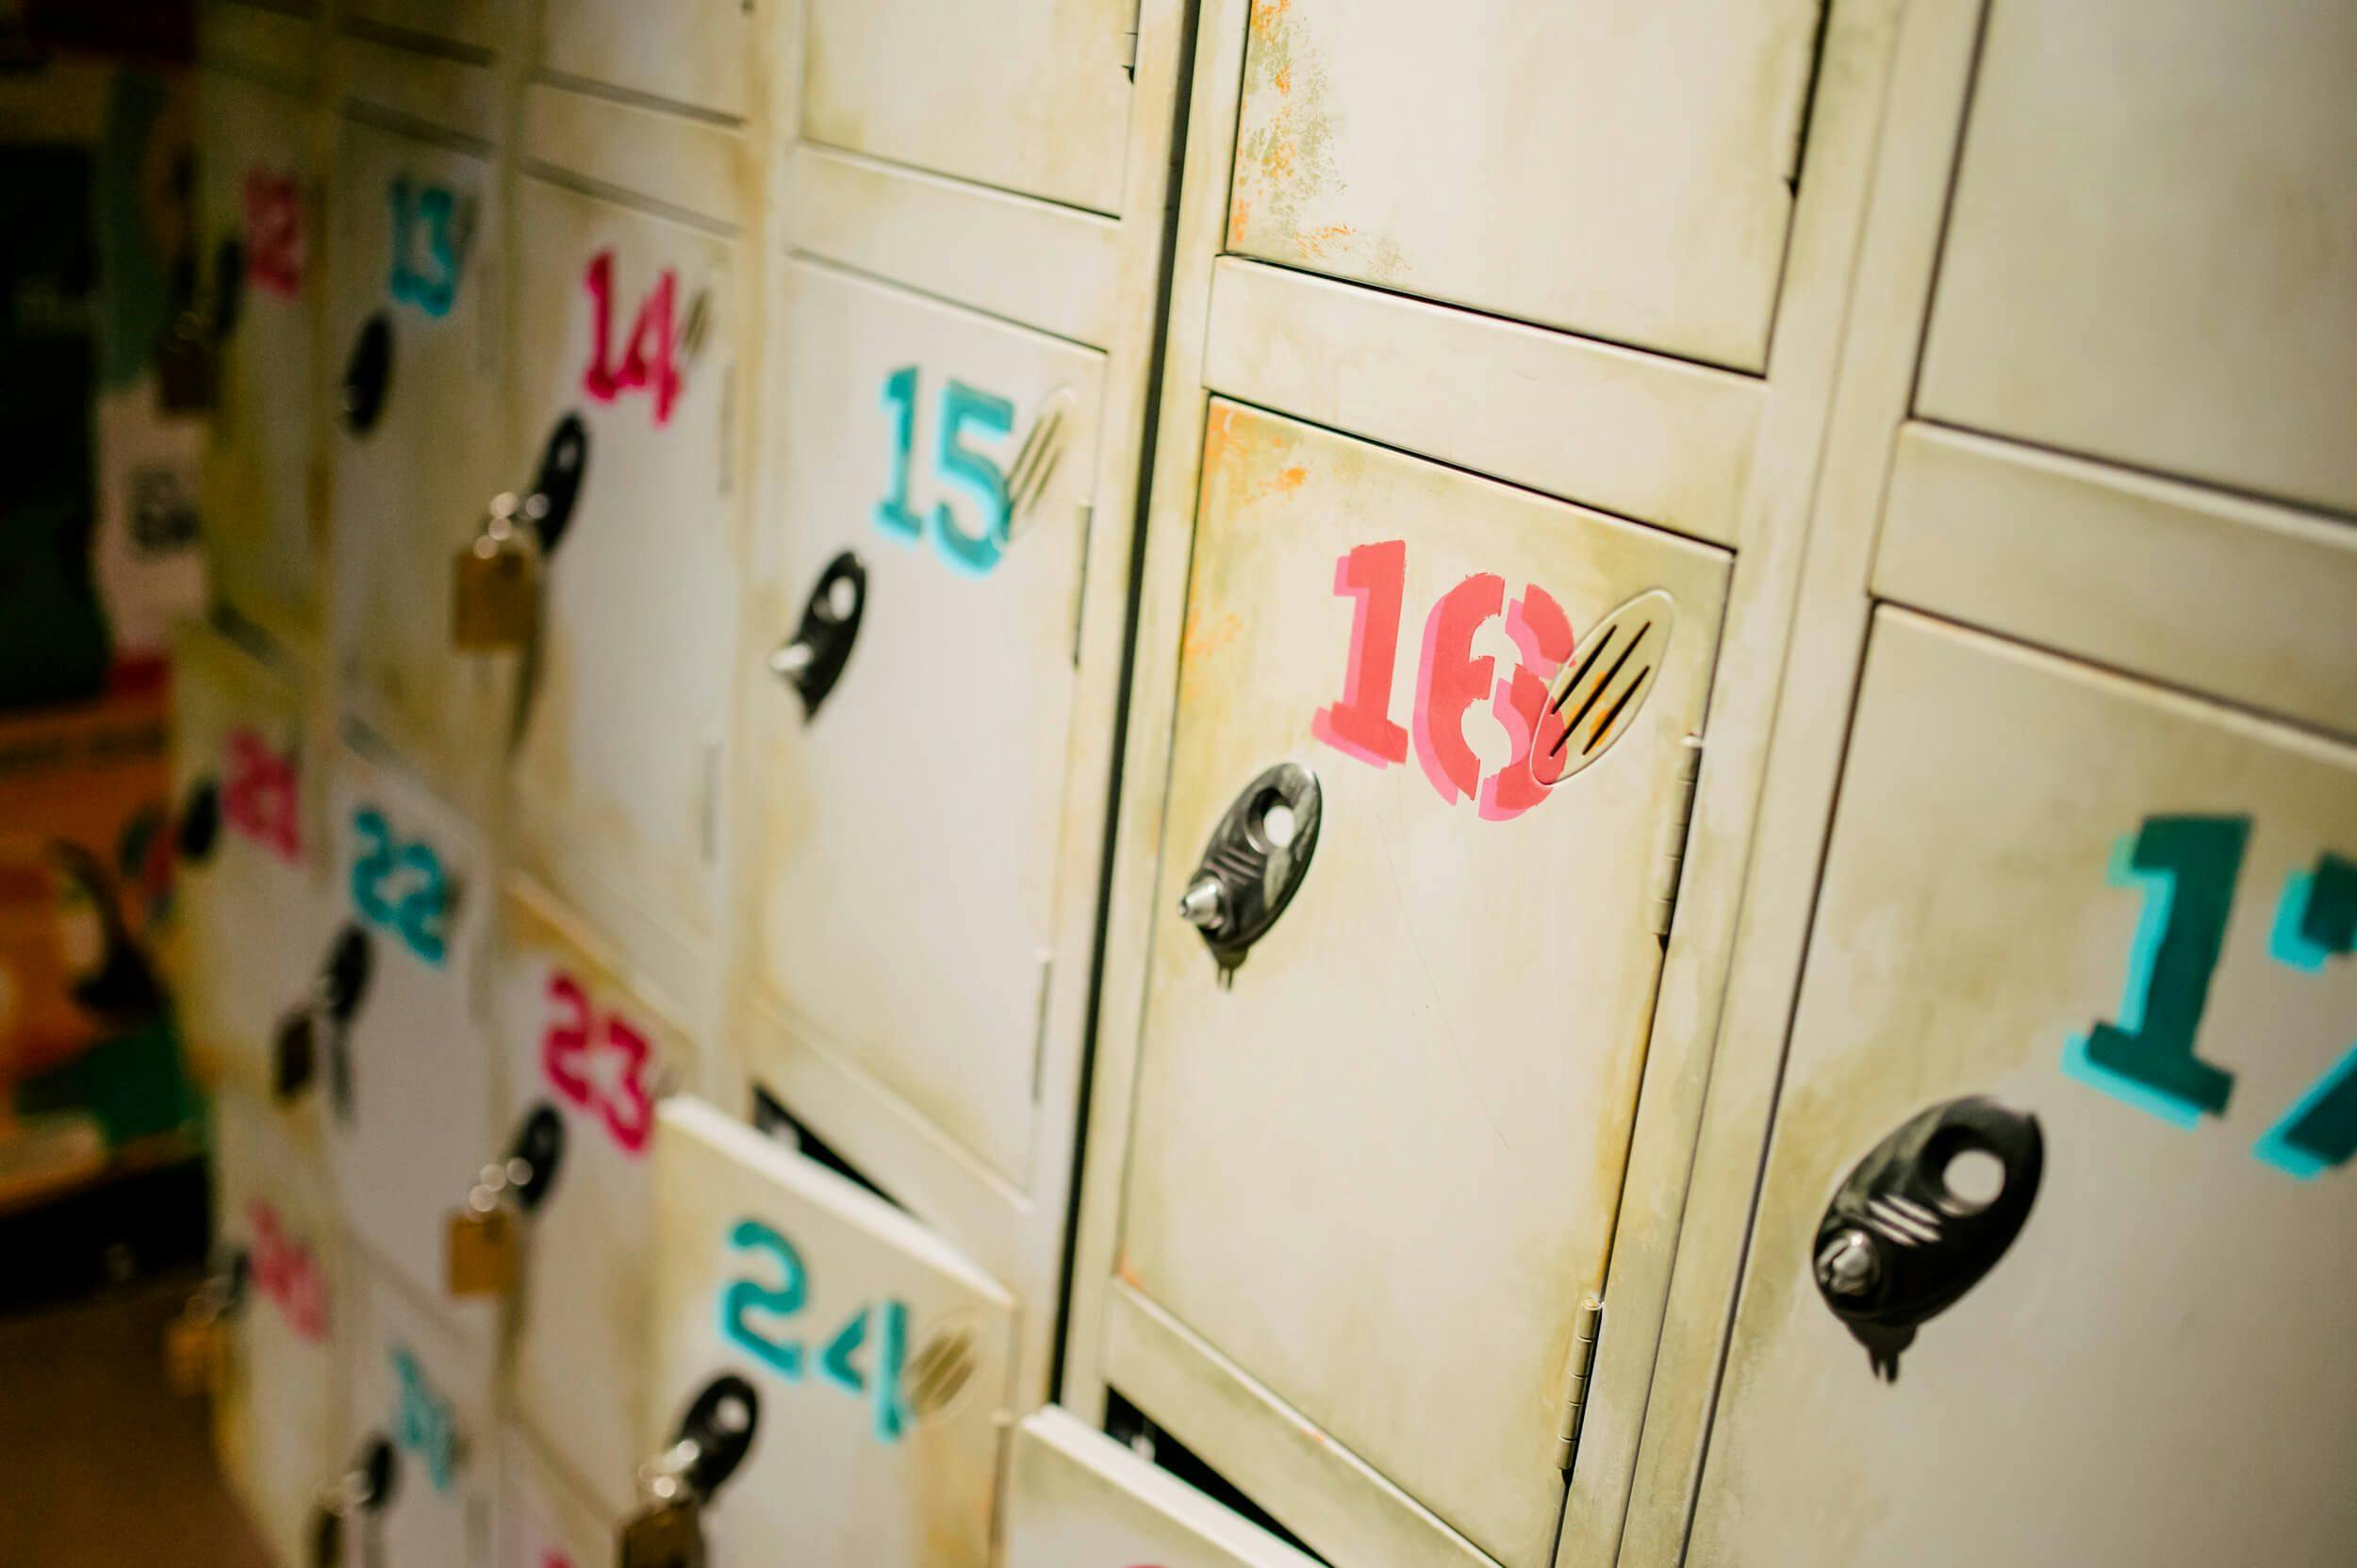 Close up image of on-site lockers; with bold fluro-coloured numbers printed on each.